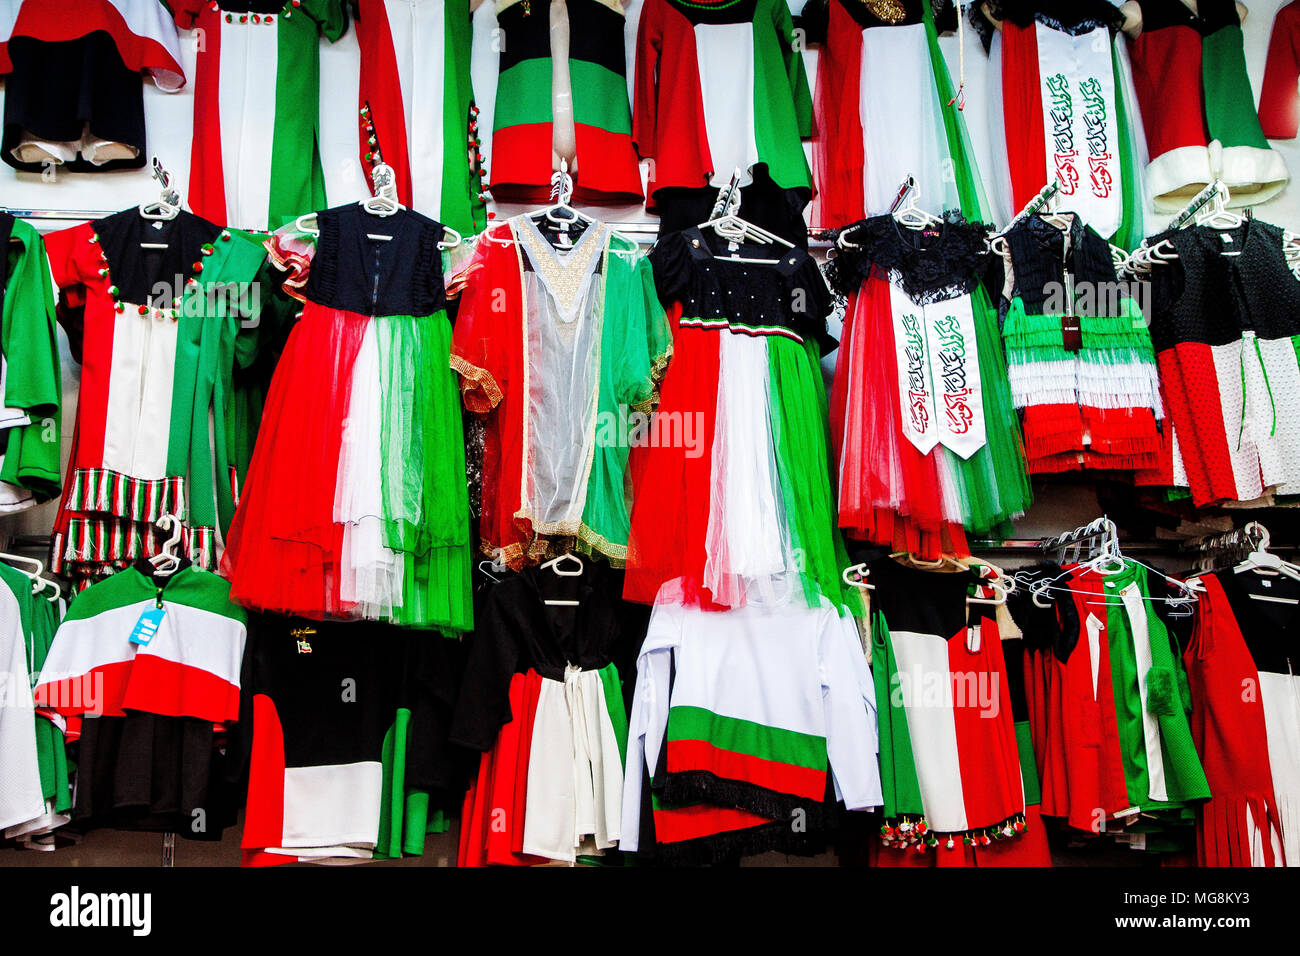 Kuwaiti Dress High Resolution Stock Photography and Images - Alamy